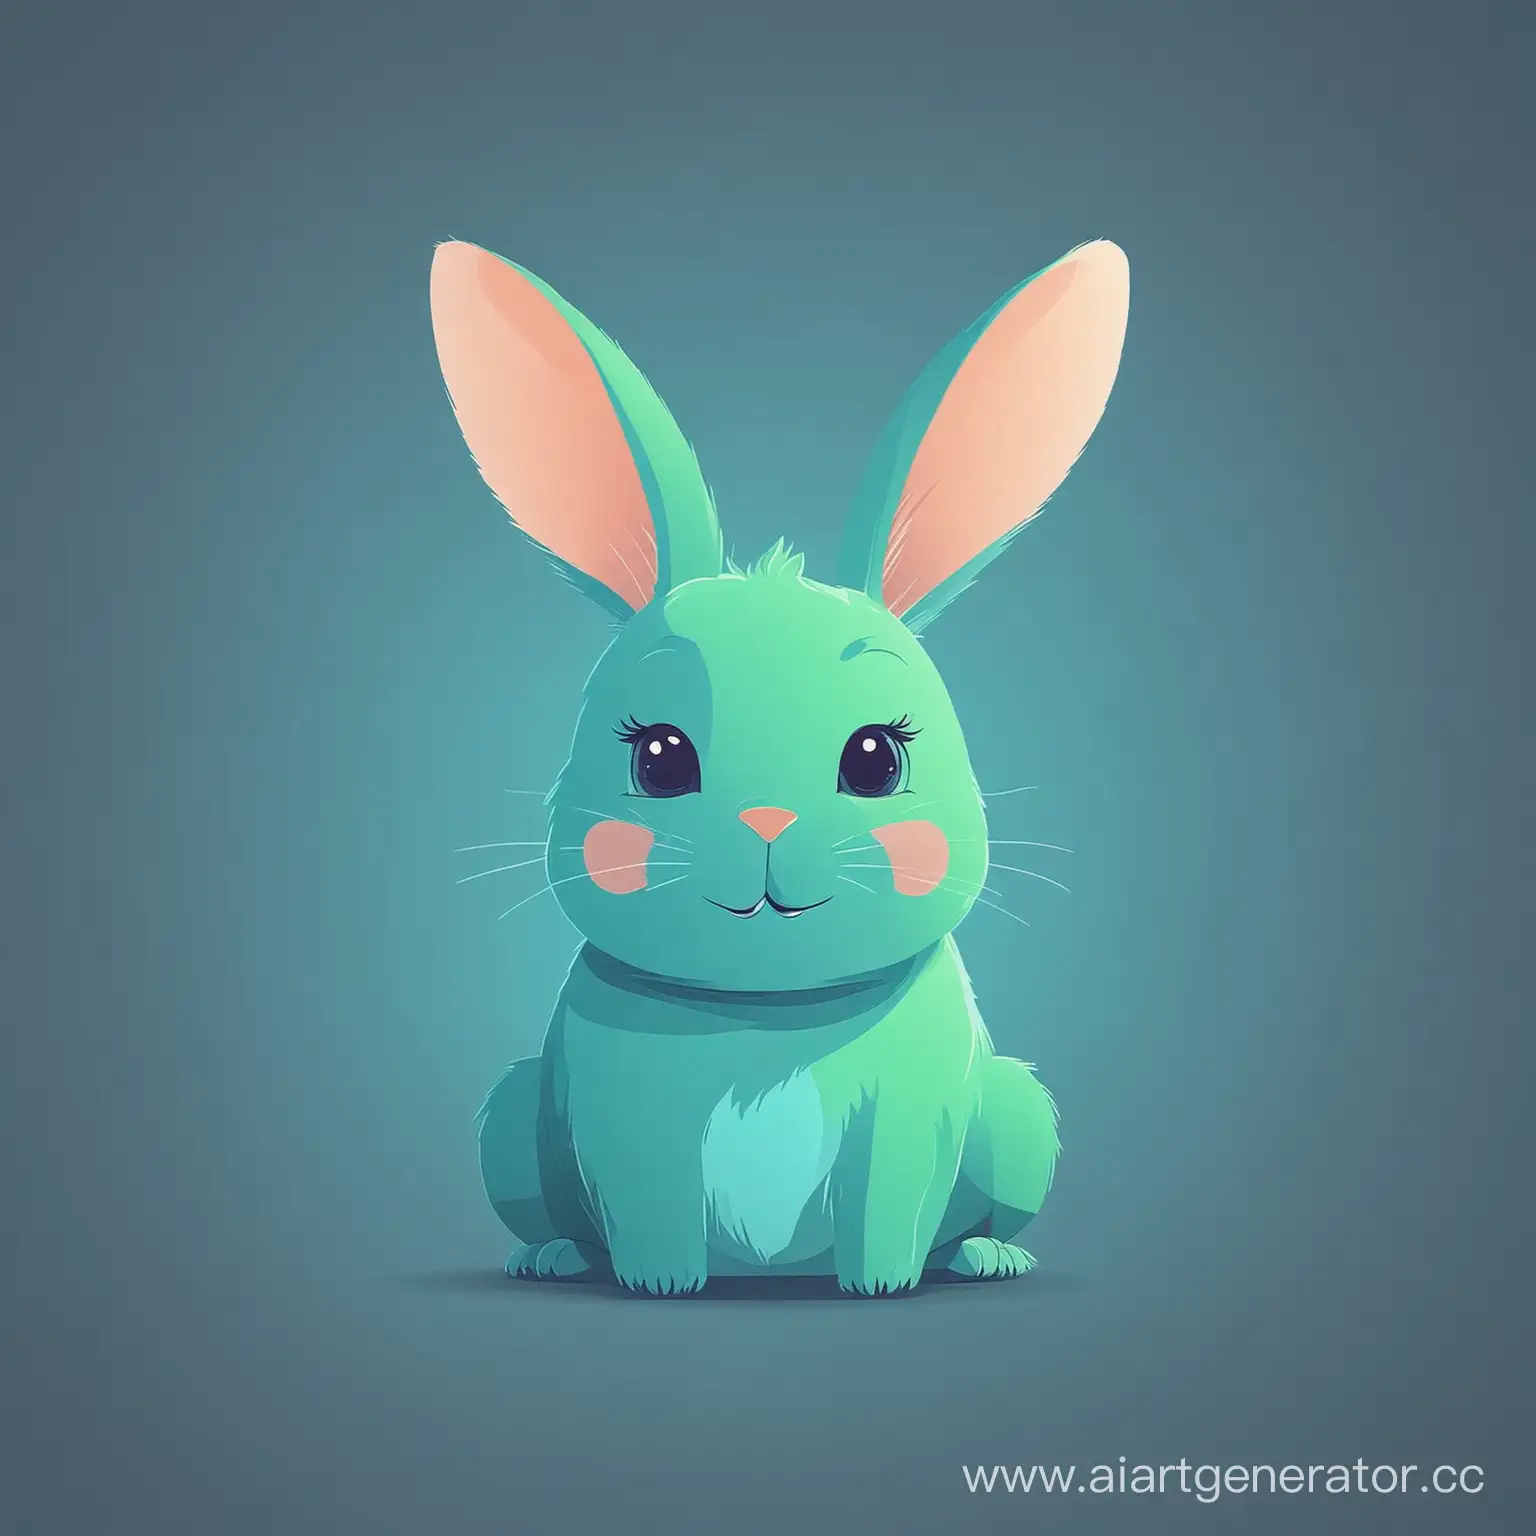 Generate a vector simplified flat image of a bunny as a kind character. Focus on simplistic design, bright, expressive shapes with a blue and green light color scheme in a minimalist style